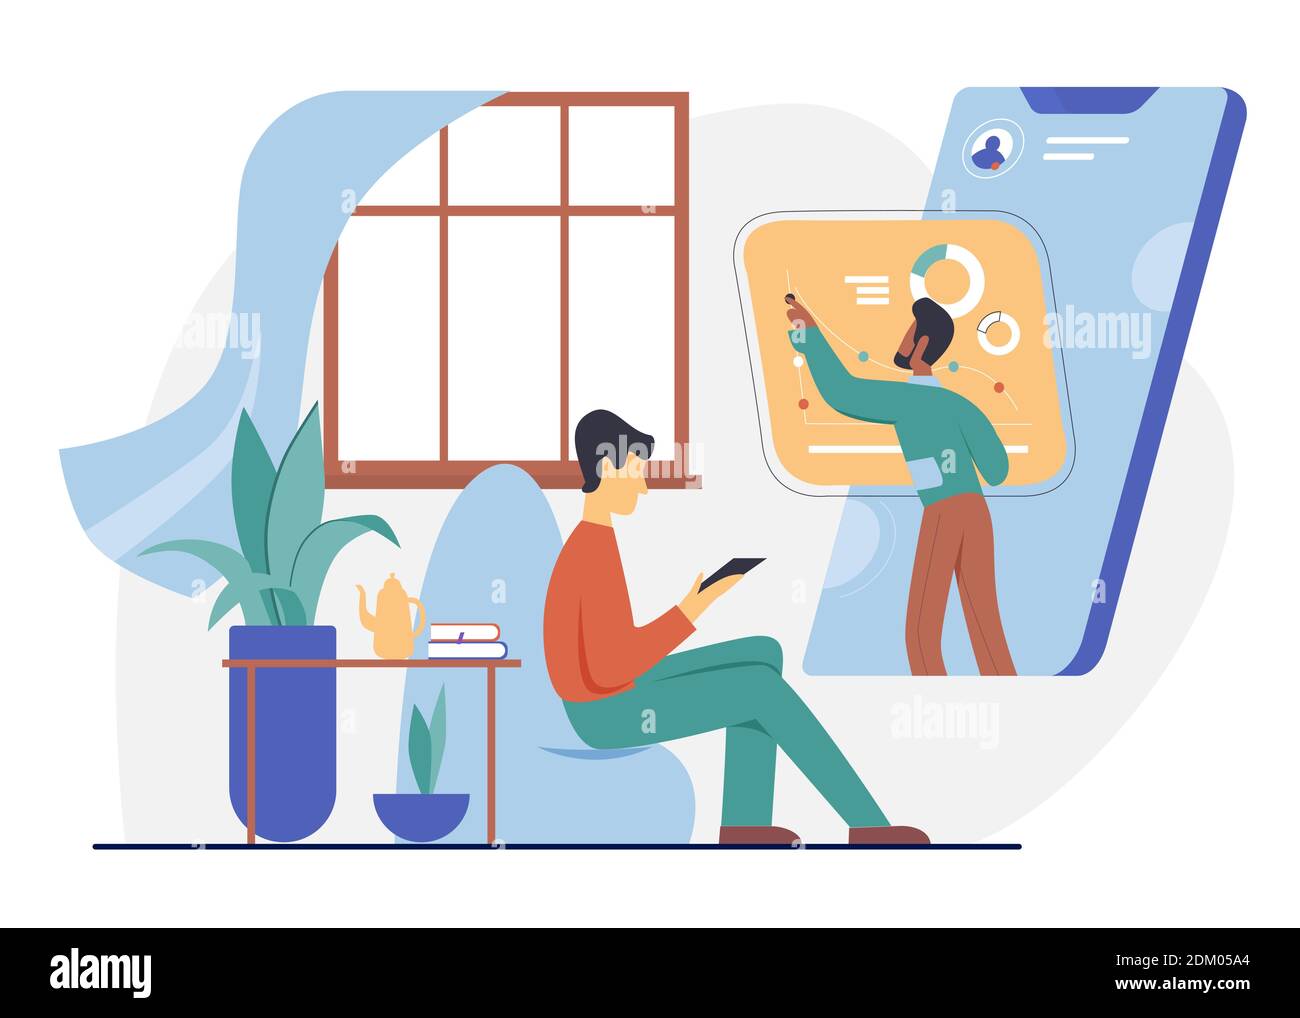 Online webinar lesson, education vector illustration. Cartoon student character studying at home, watching seminar lecture with teacher talking from phone screen, internet web course isolated on white Stock Vector